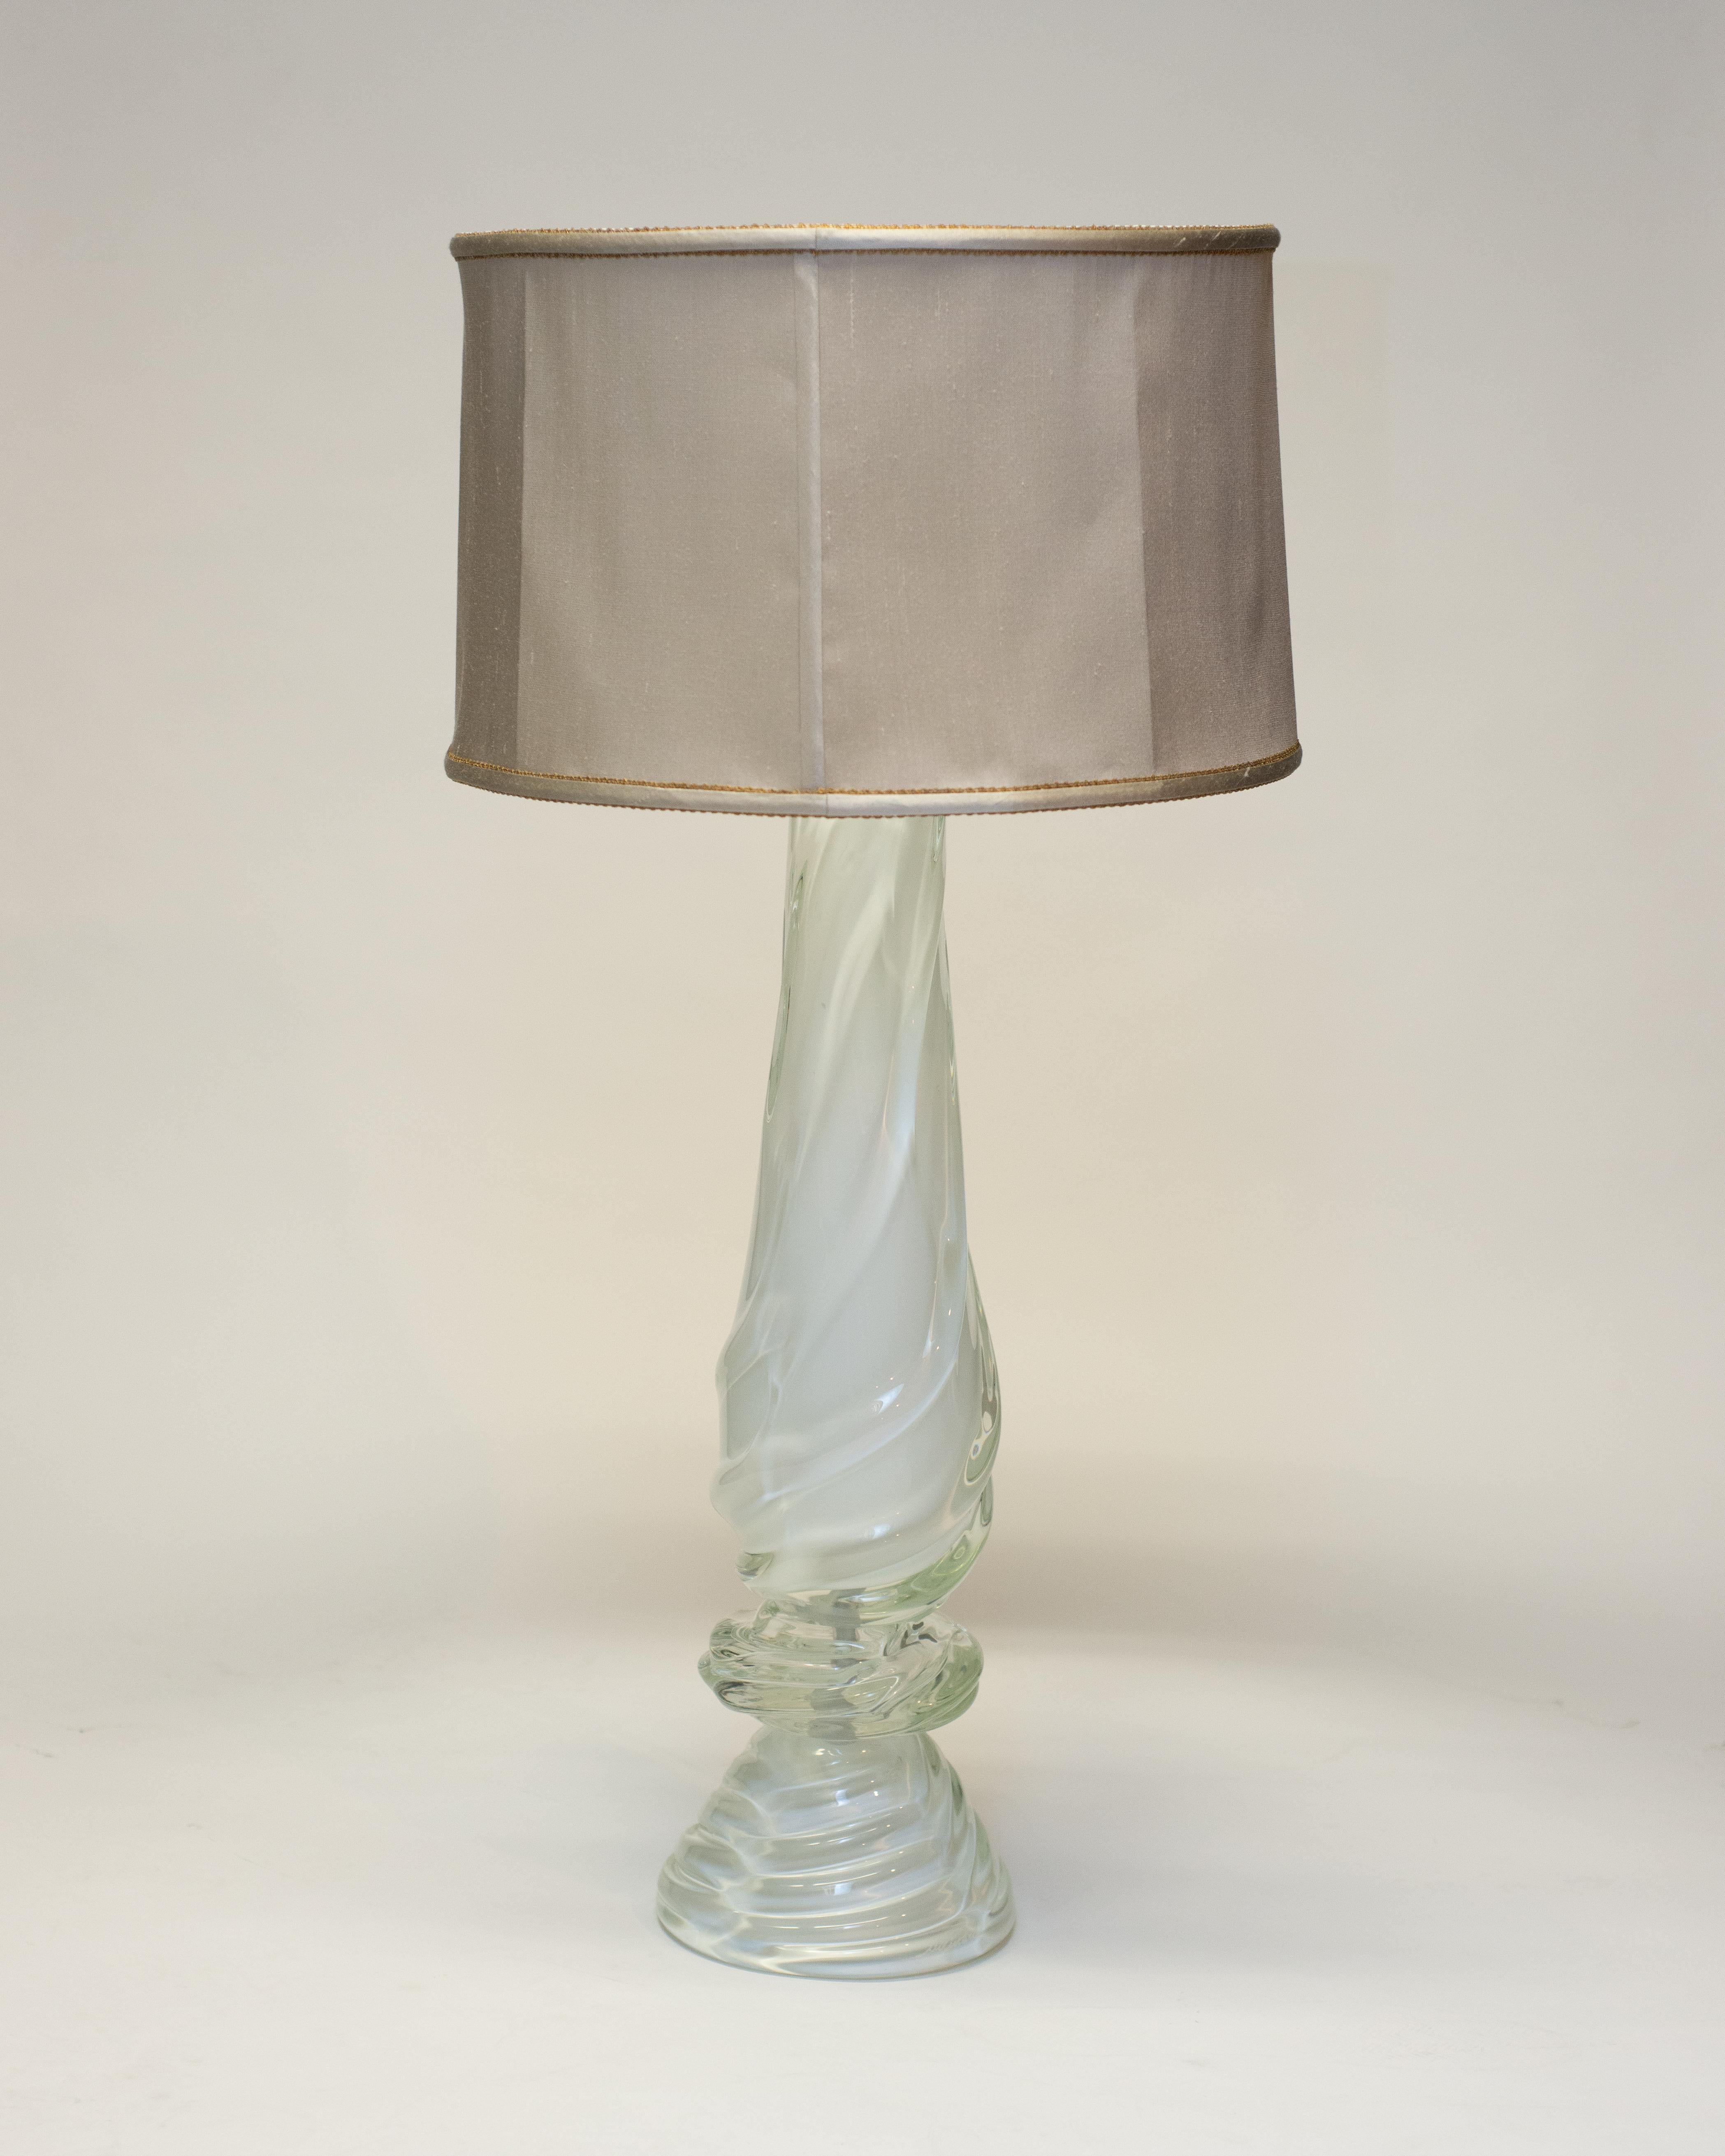 A pair of large white Murano milk glass lamps suitable for many style of interior. These grand and elegant lamps are fitted with custom drum silk shades, finished with vintage metallic trims. Wired for North American Outlets.